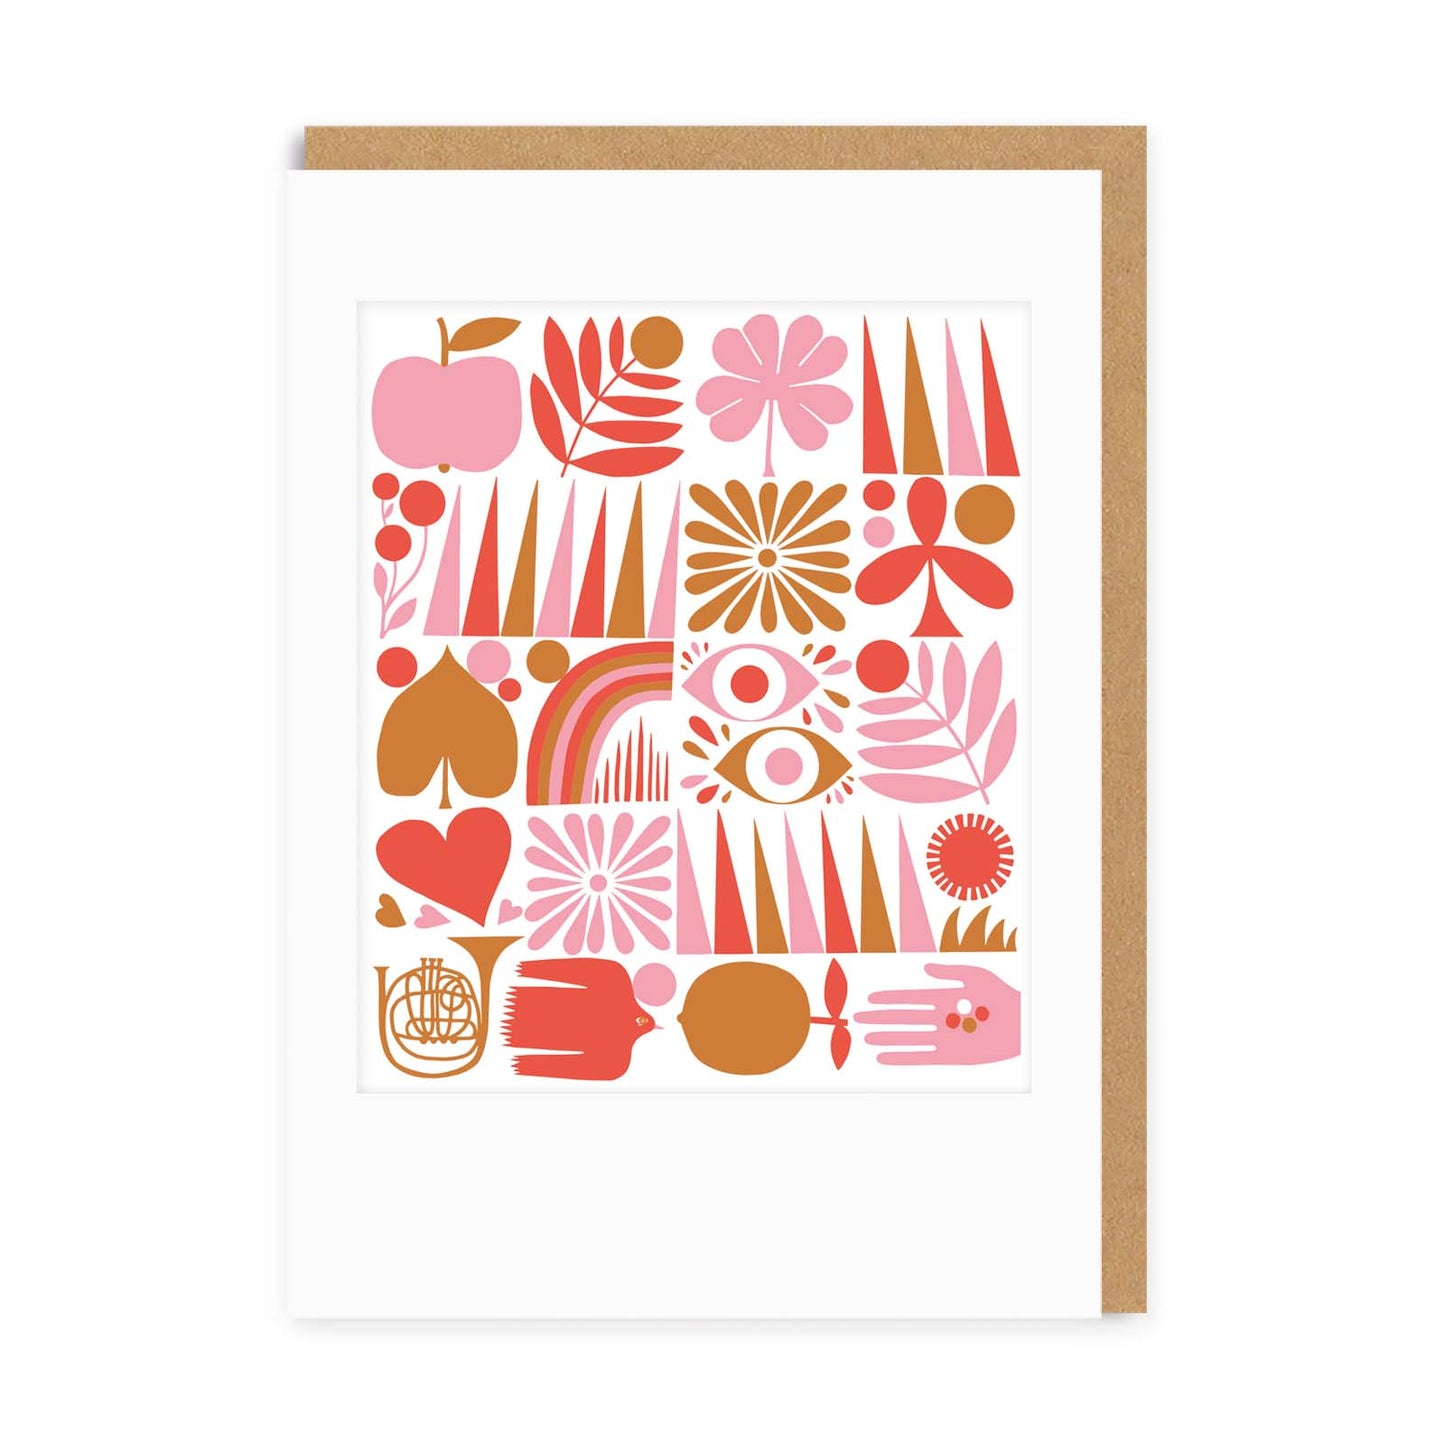 Abstract Grid Greeting Card